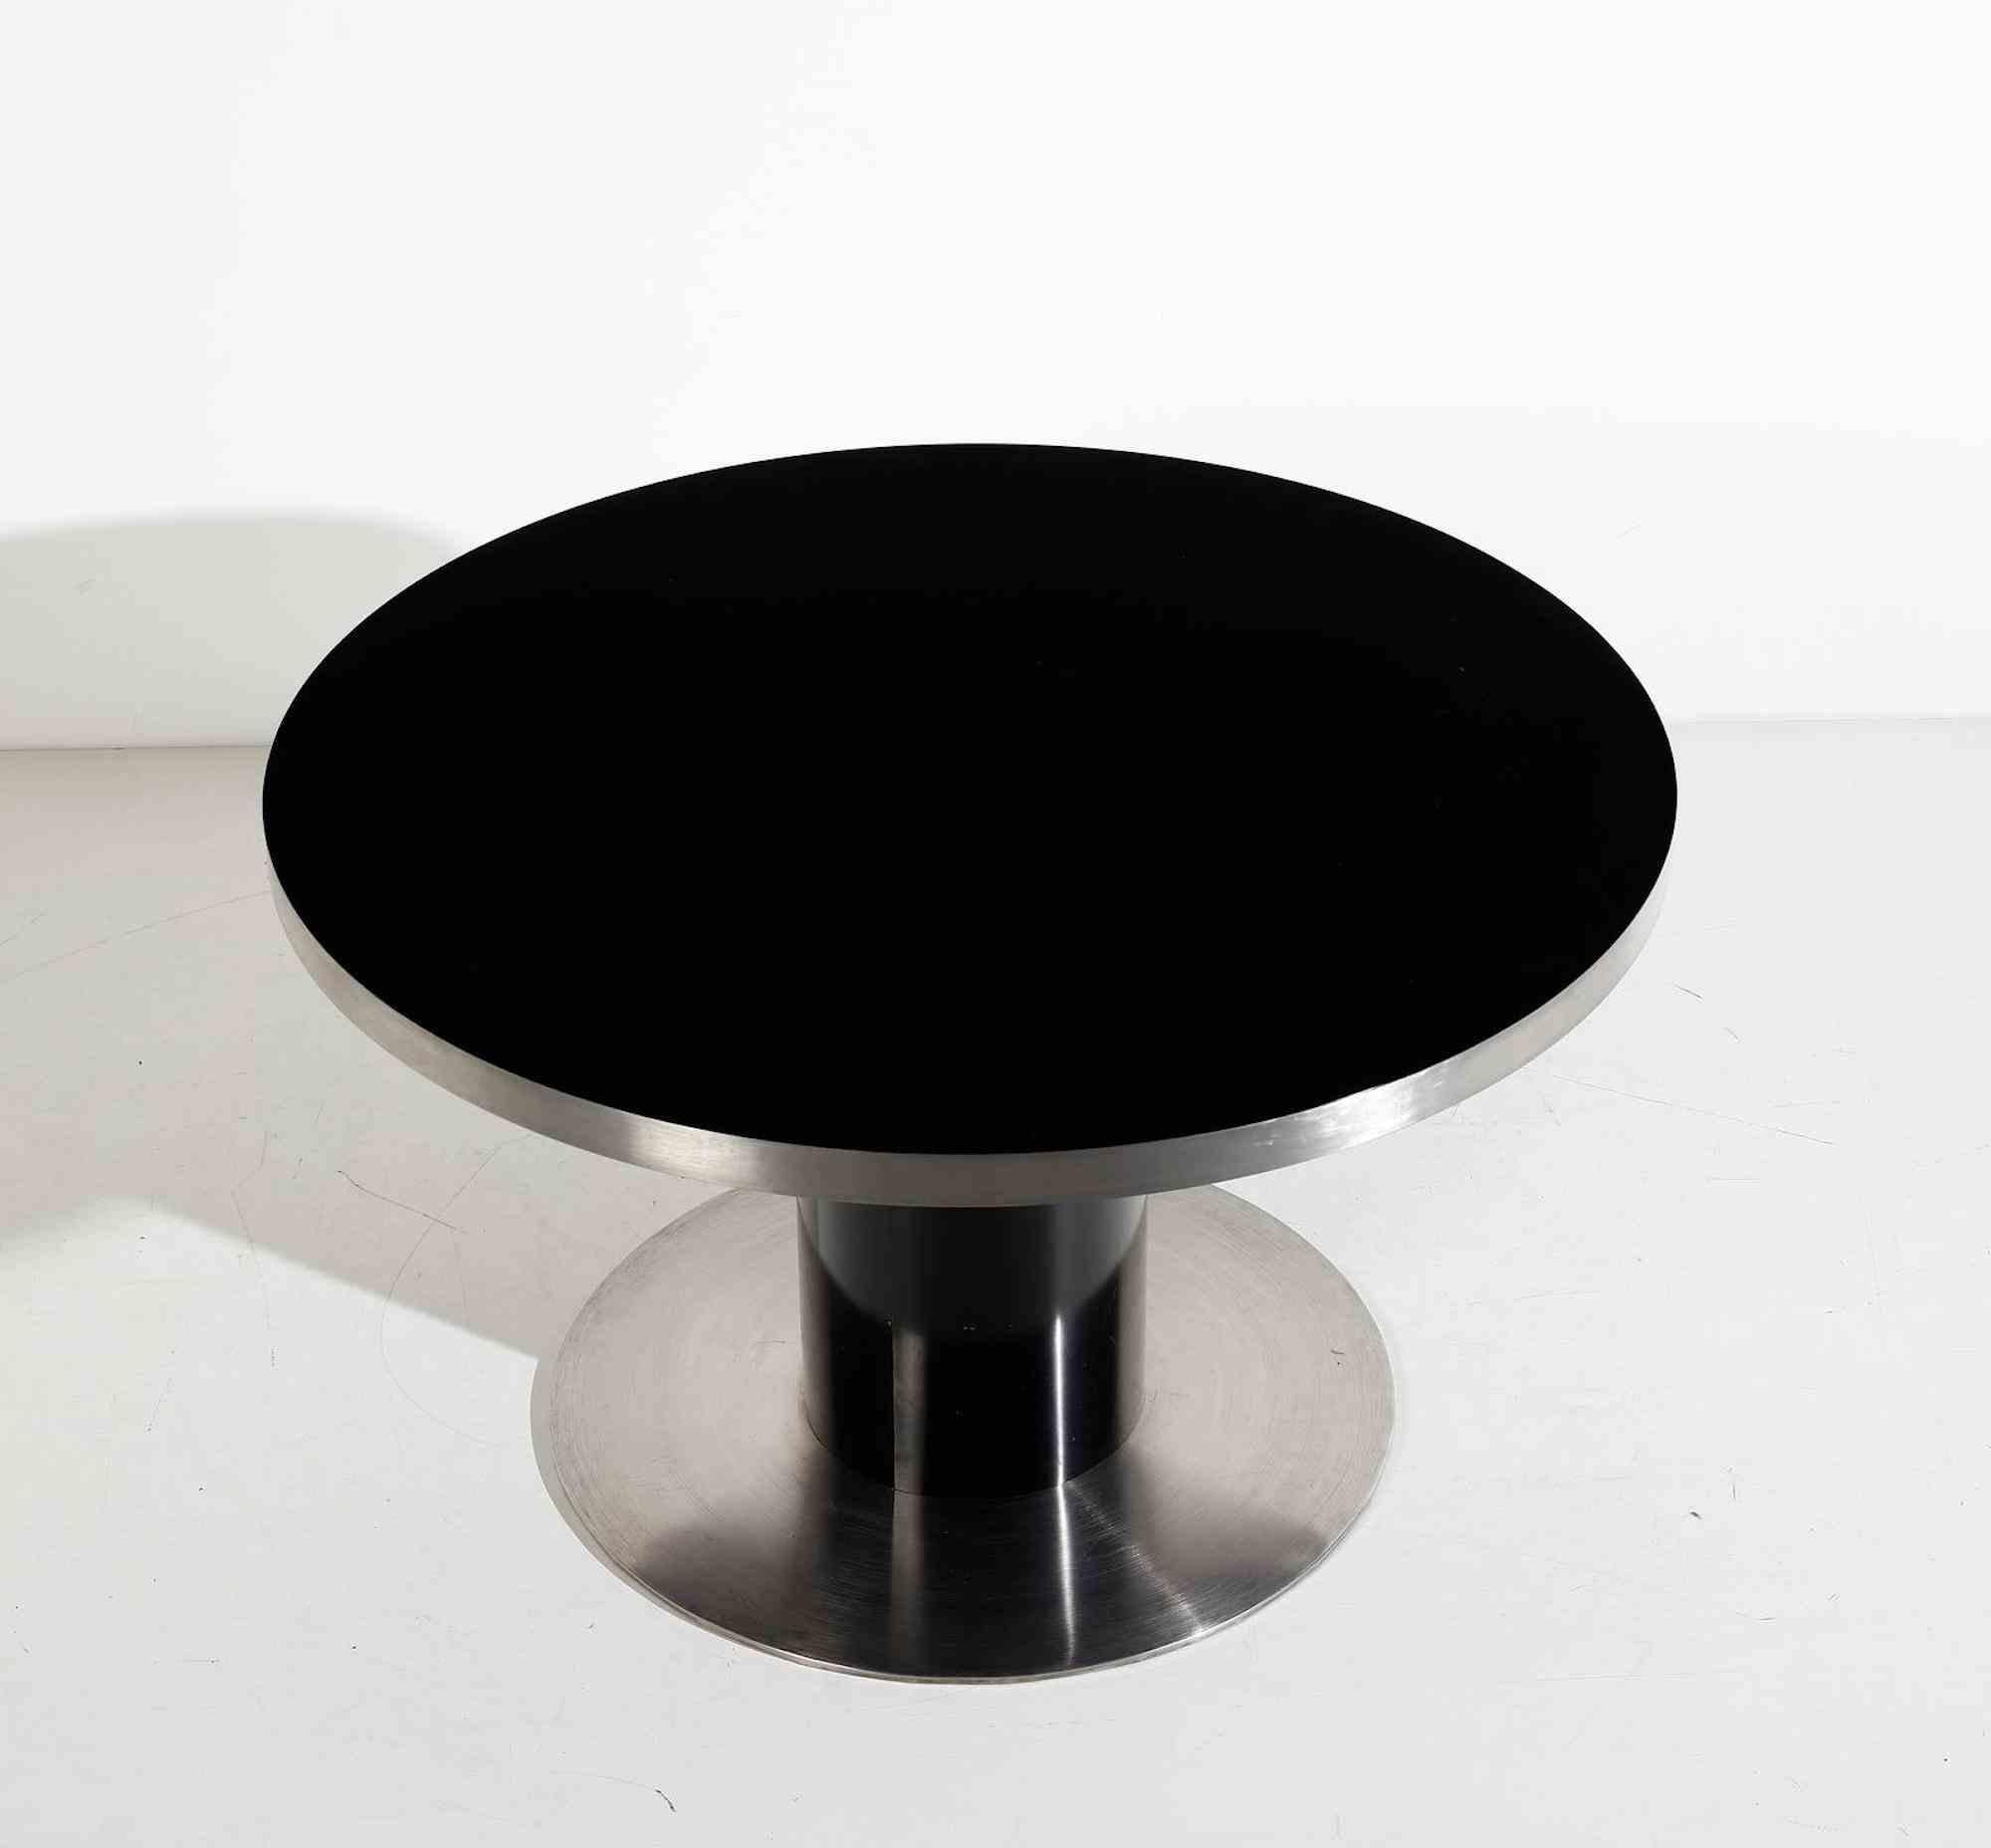 Italian Vintage Table by Willy Rizzo fro Atelier Willy Rizzo, 1970s For Sale